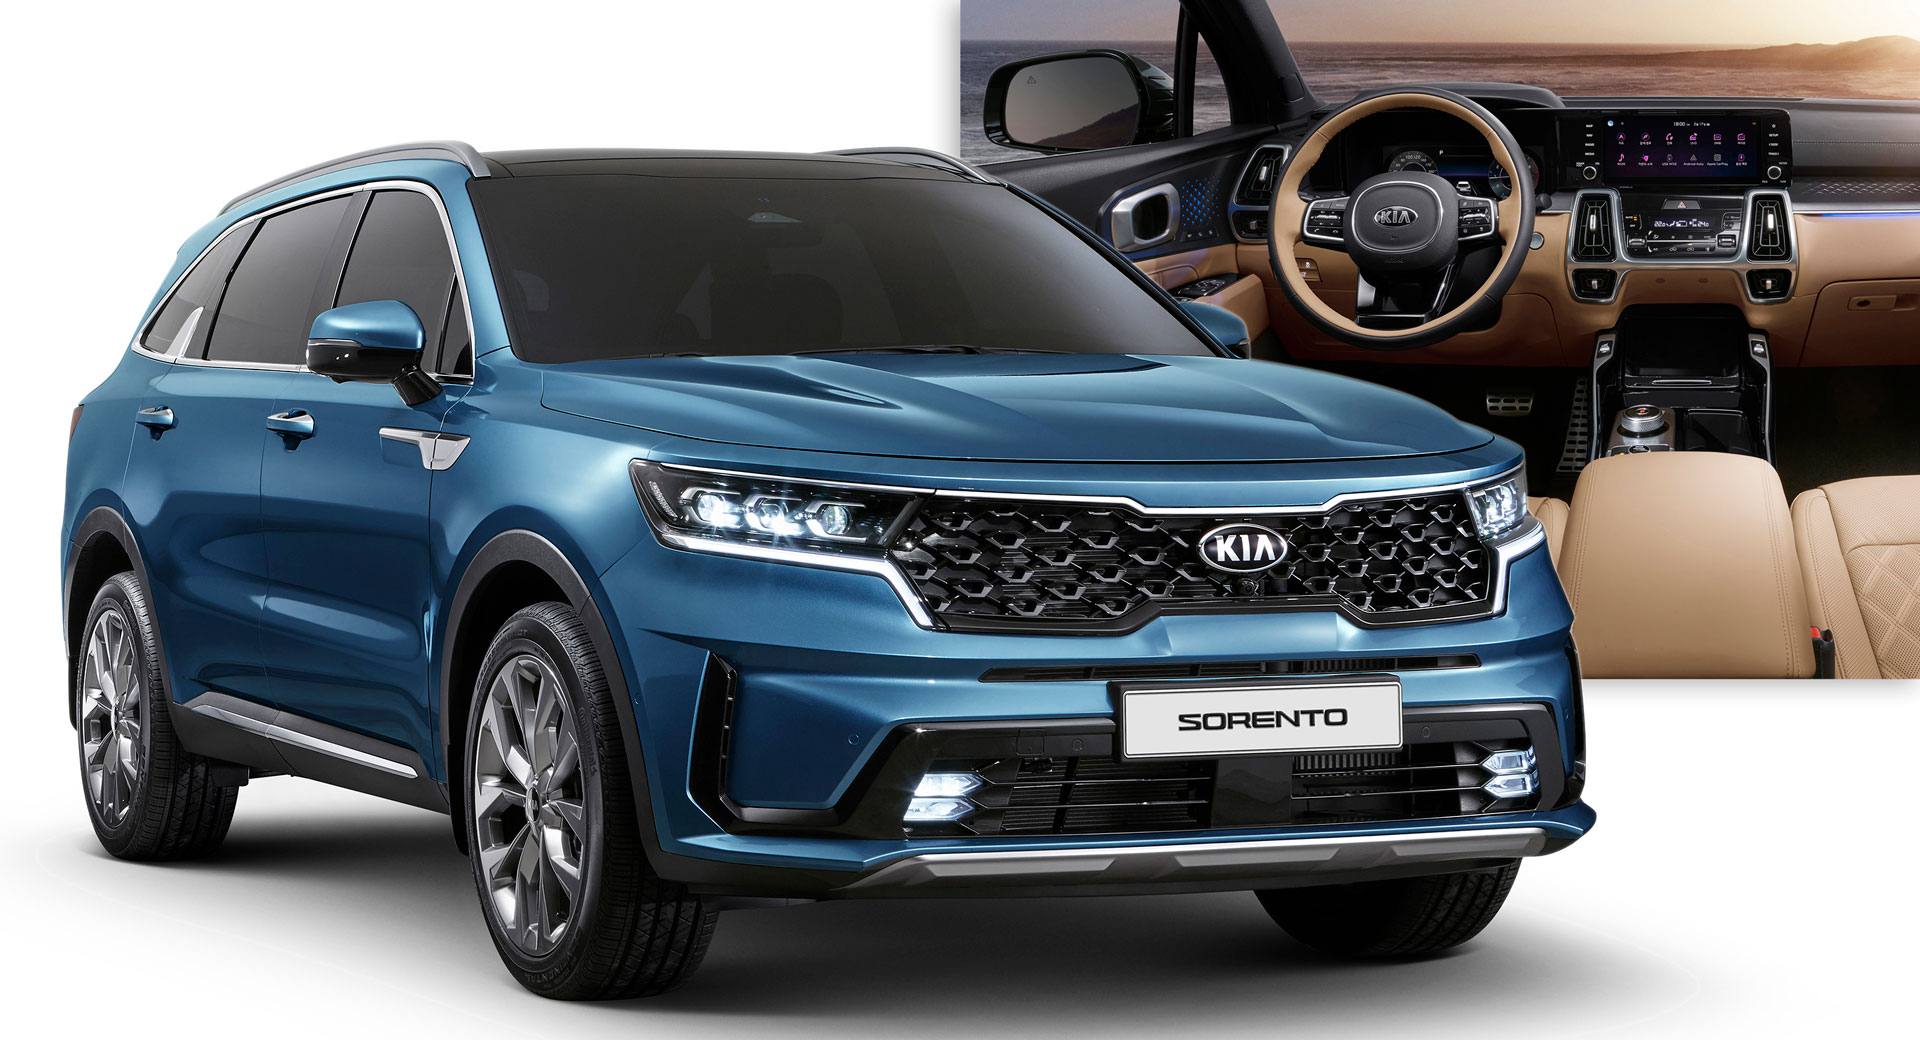 2021 Kia Sorento: Here Are The First Official Images And Details